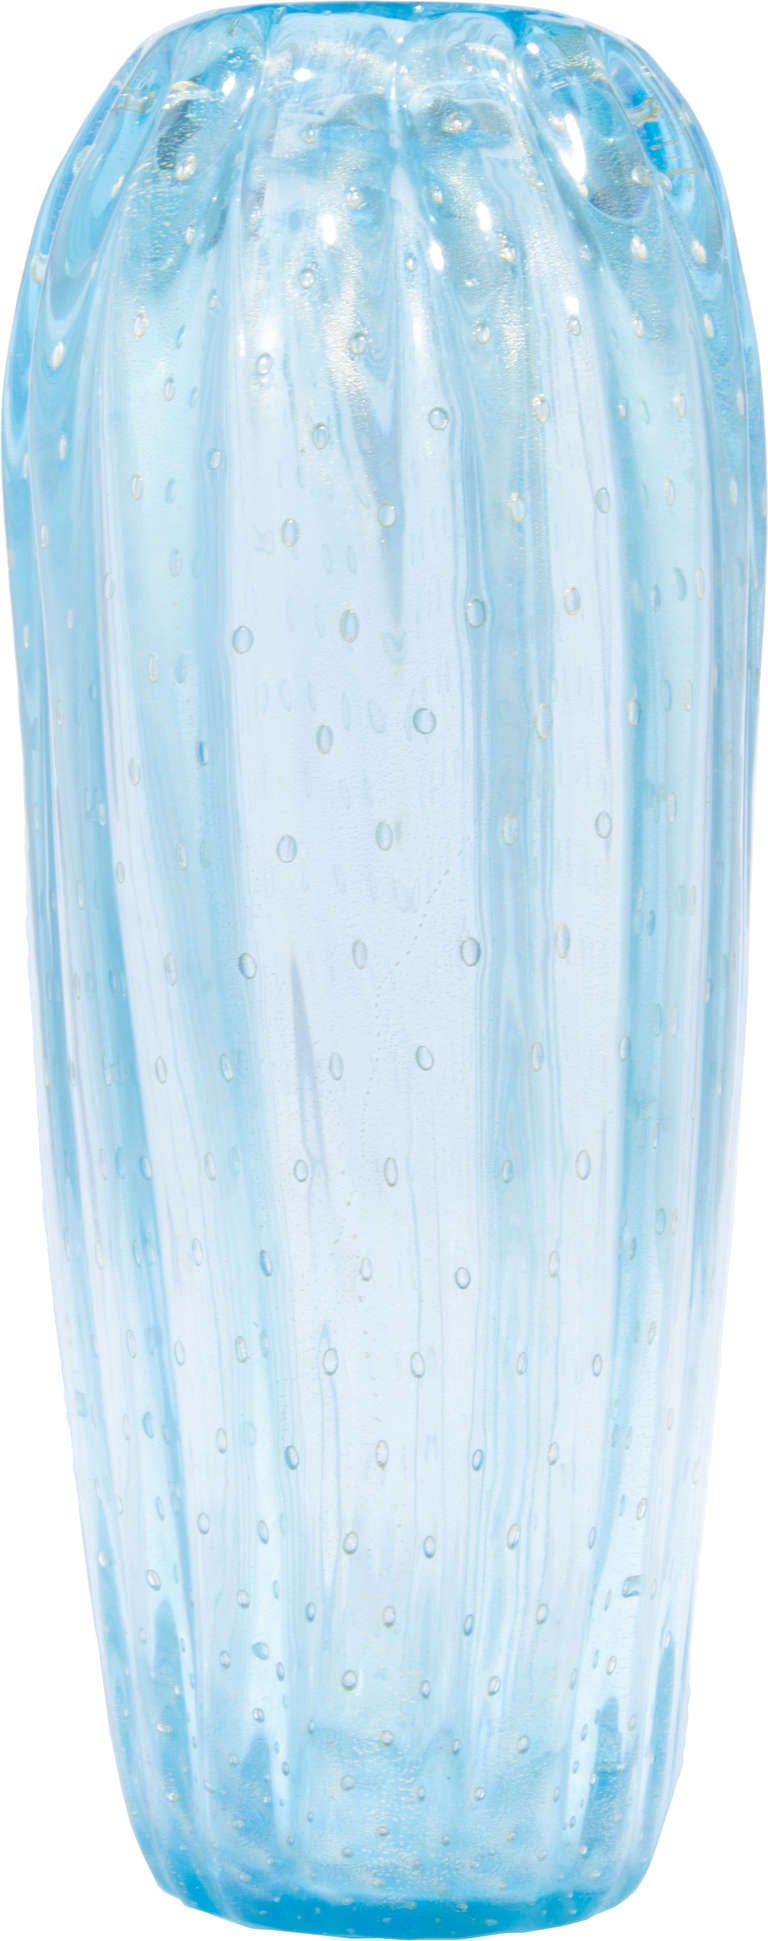 This vase has a beautiful watery blue color.